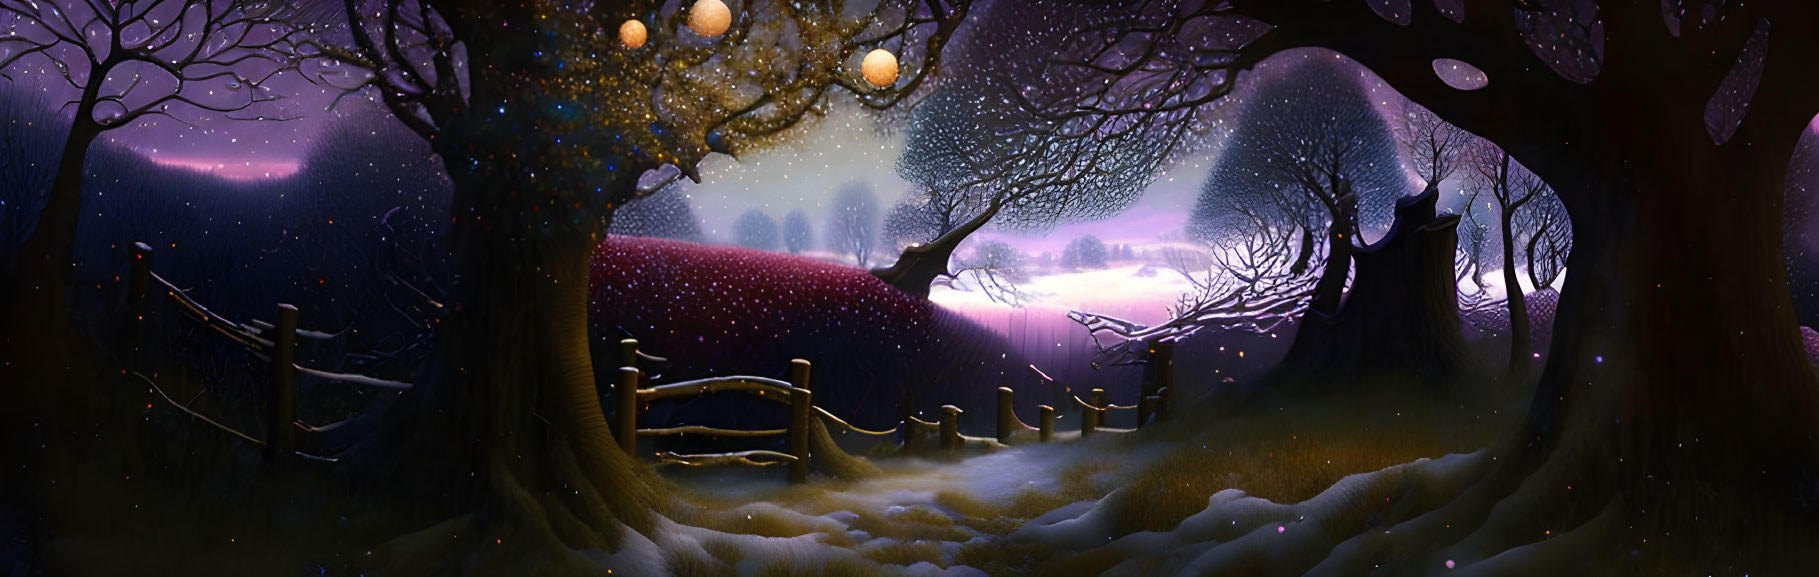 Panoramic fantasy night landscape with glowing trees and starry sky